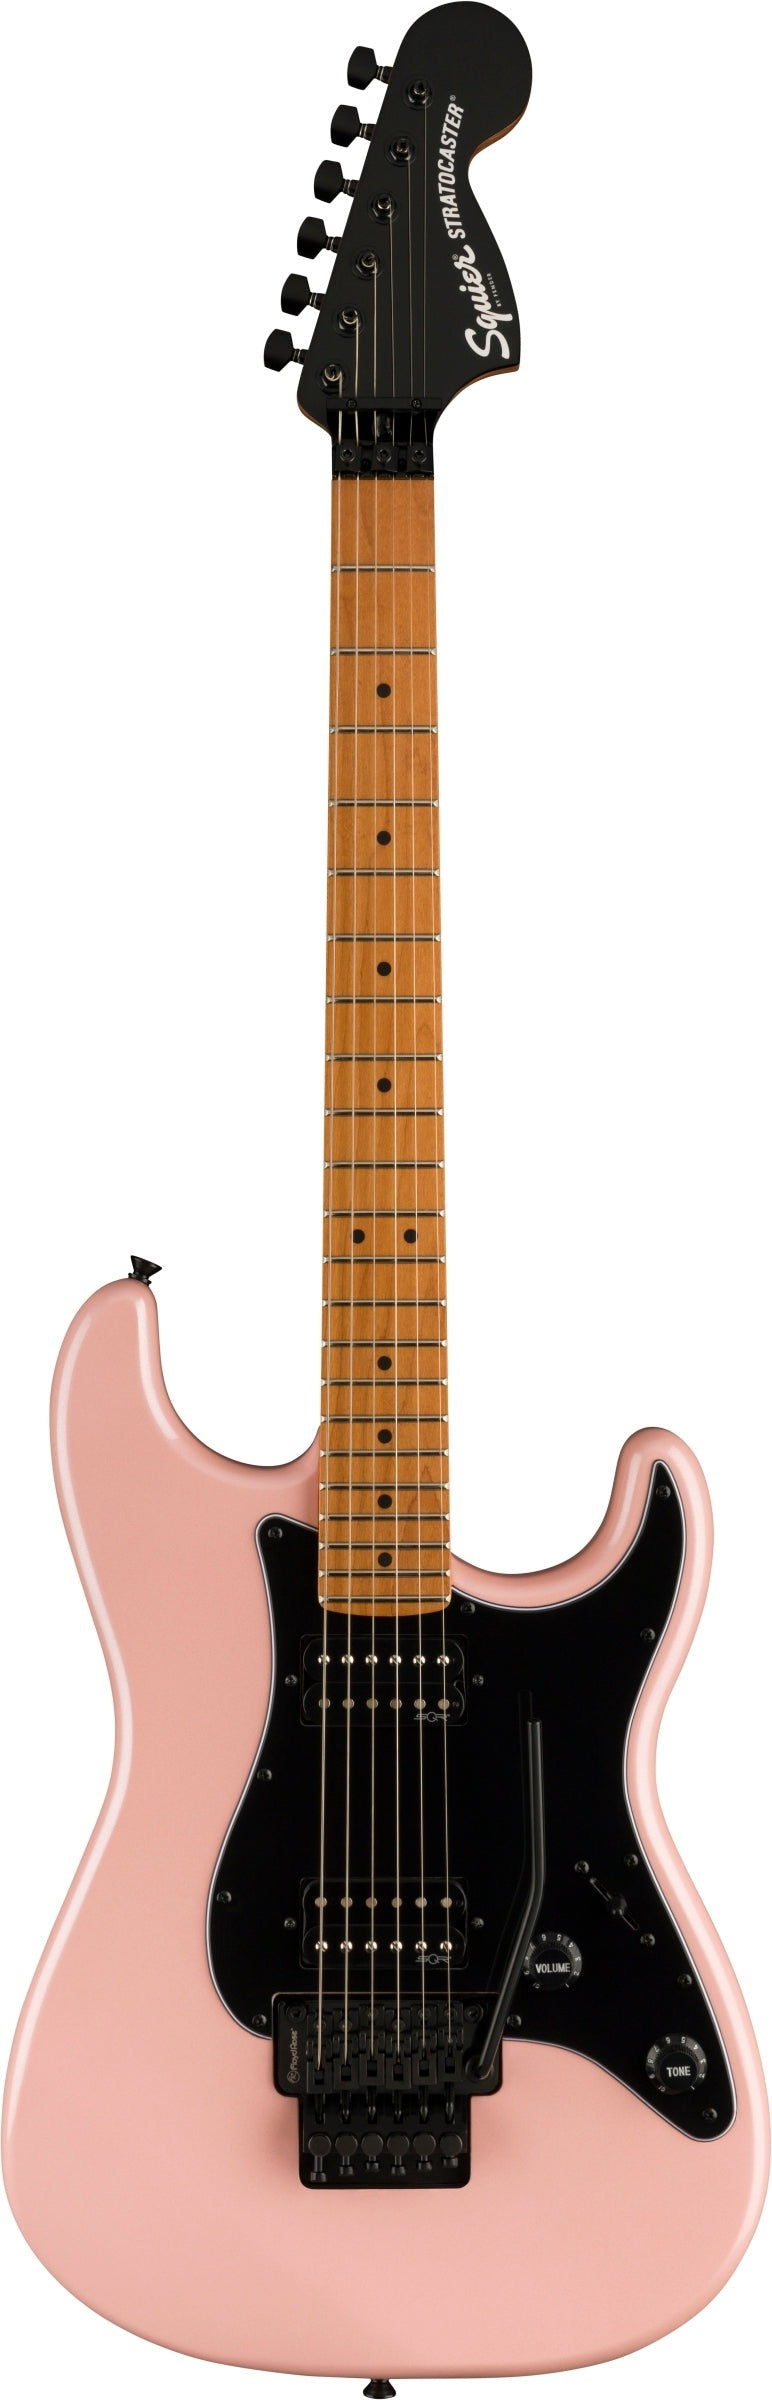 Squier Contemporary Stratocaster HH FR Solidbody Electric Guitar - Shell Pink Pearl